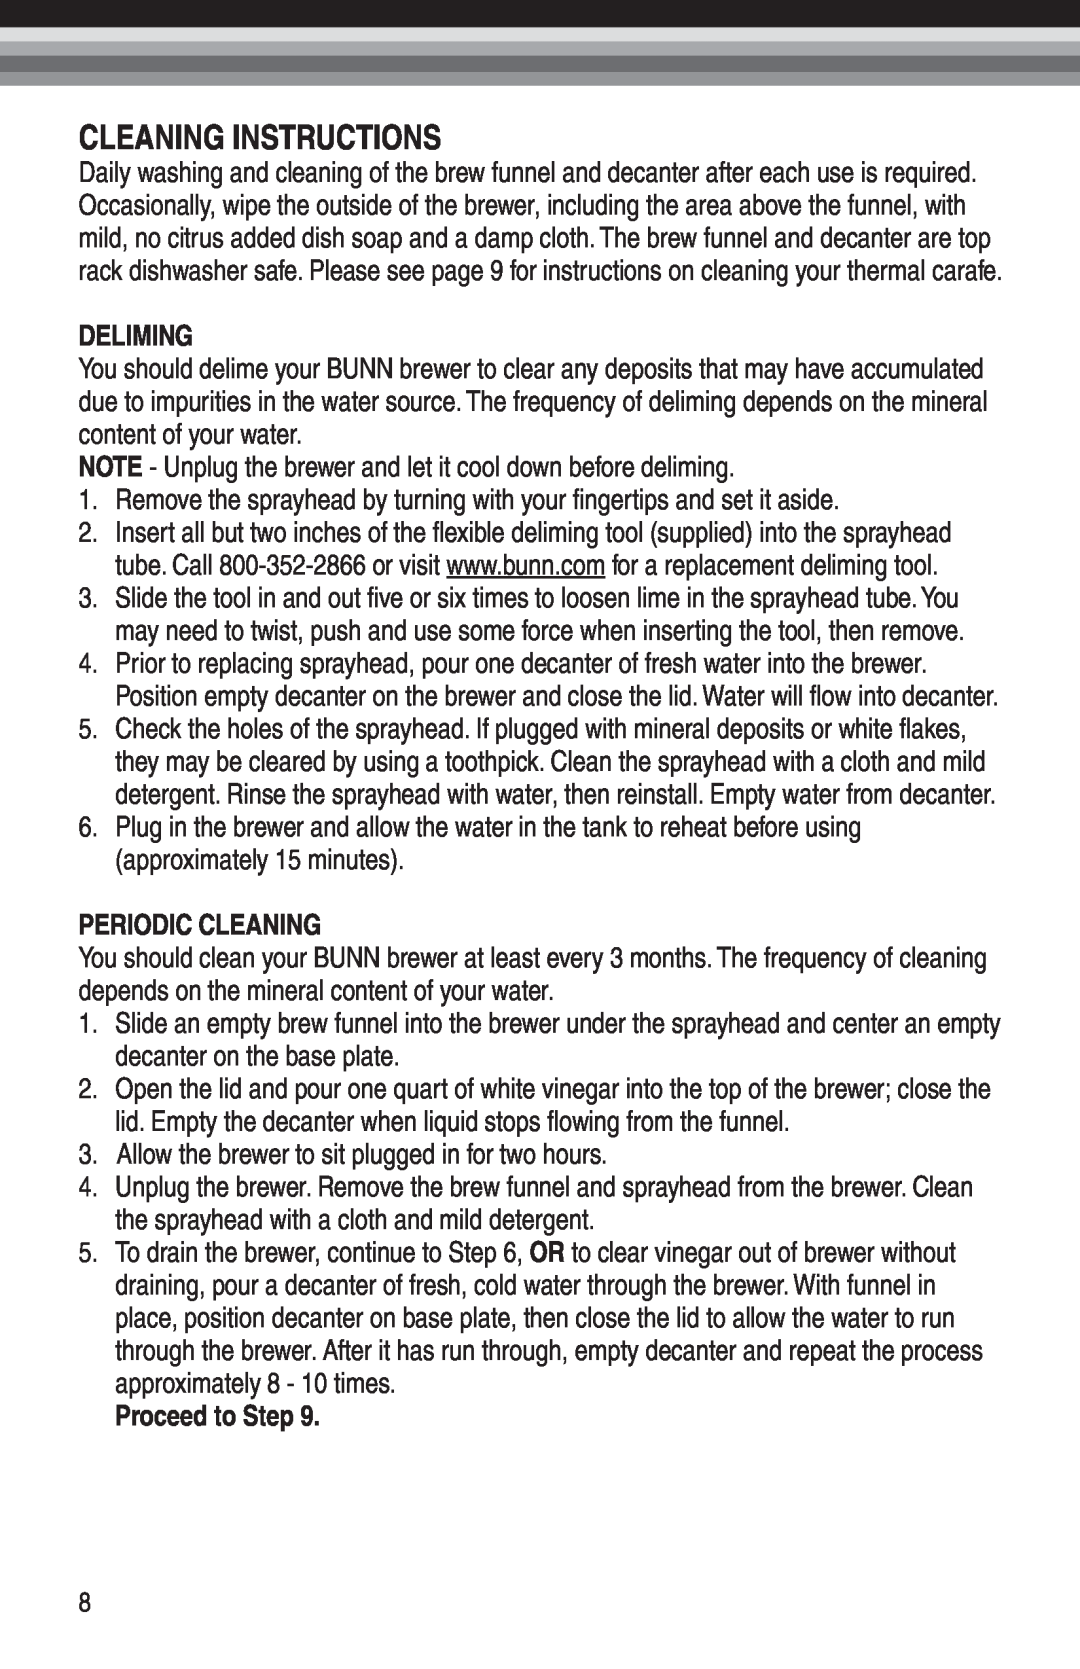 Bunn GRX manual Cleaning Instructions, Deliming, Periodic Cleaning, Proceed to Step 